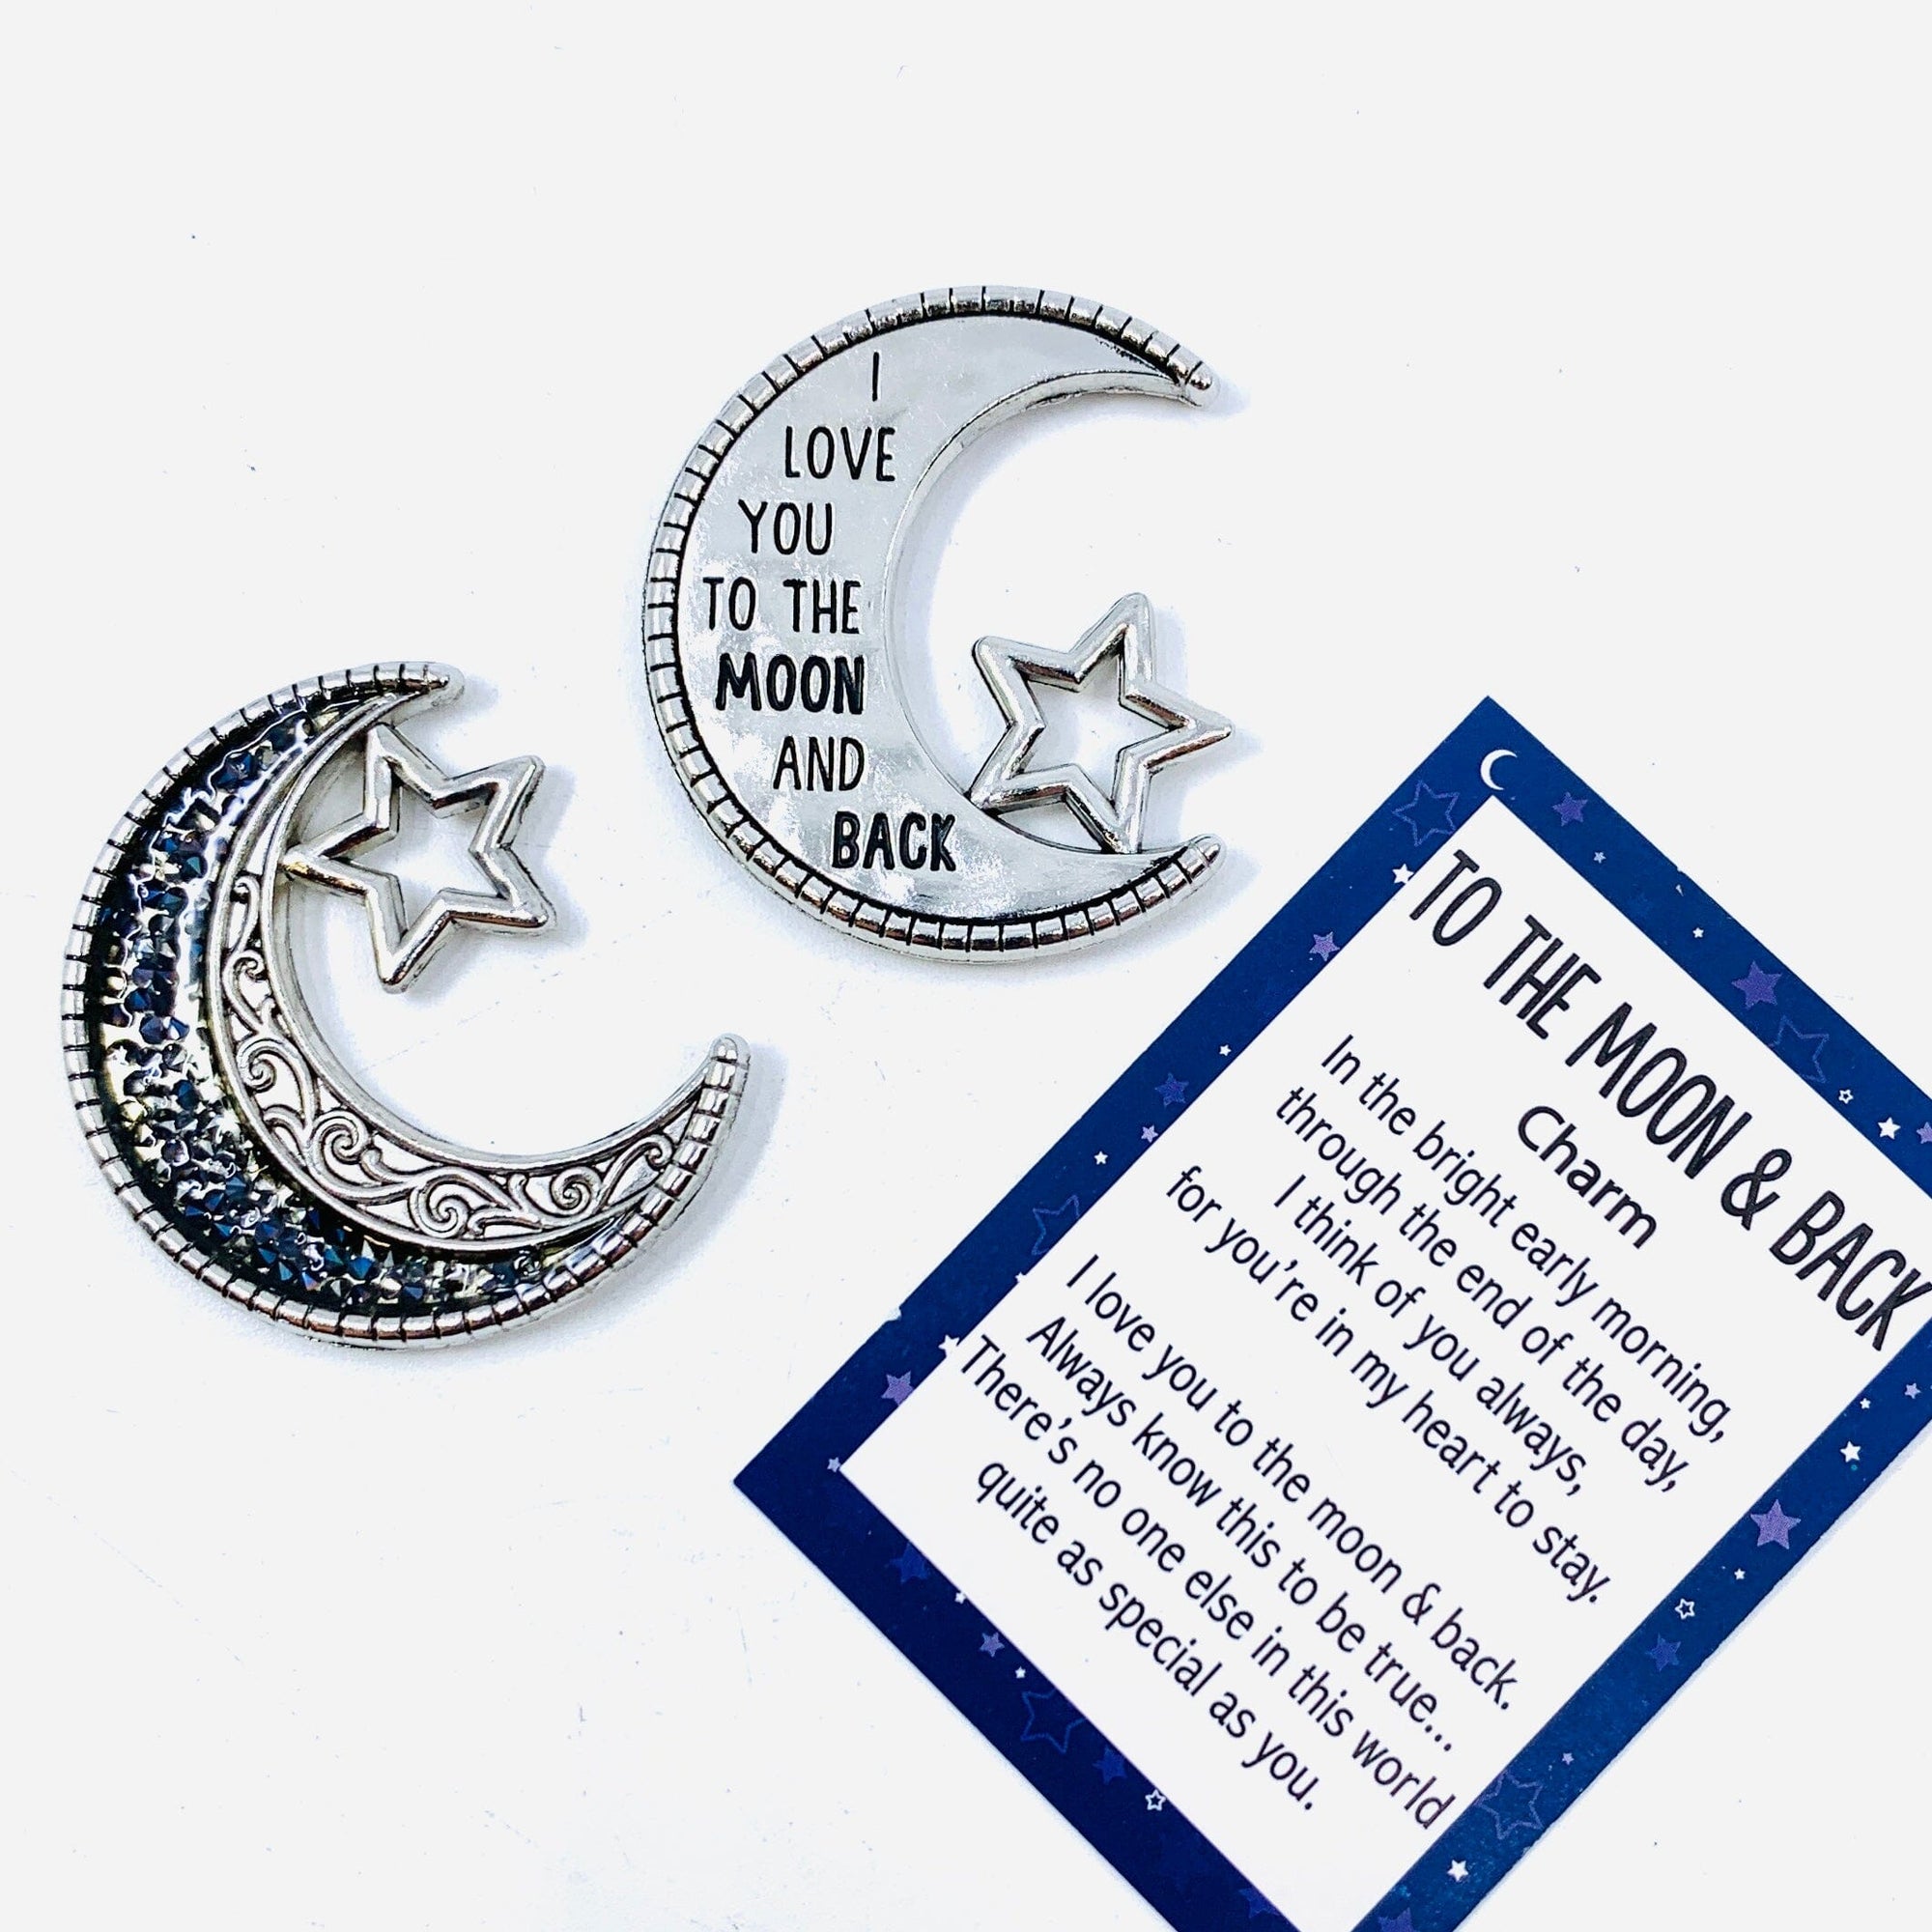 To The Moon And Back Pocket Charm PT67 Miniature GANZ 